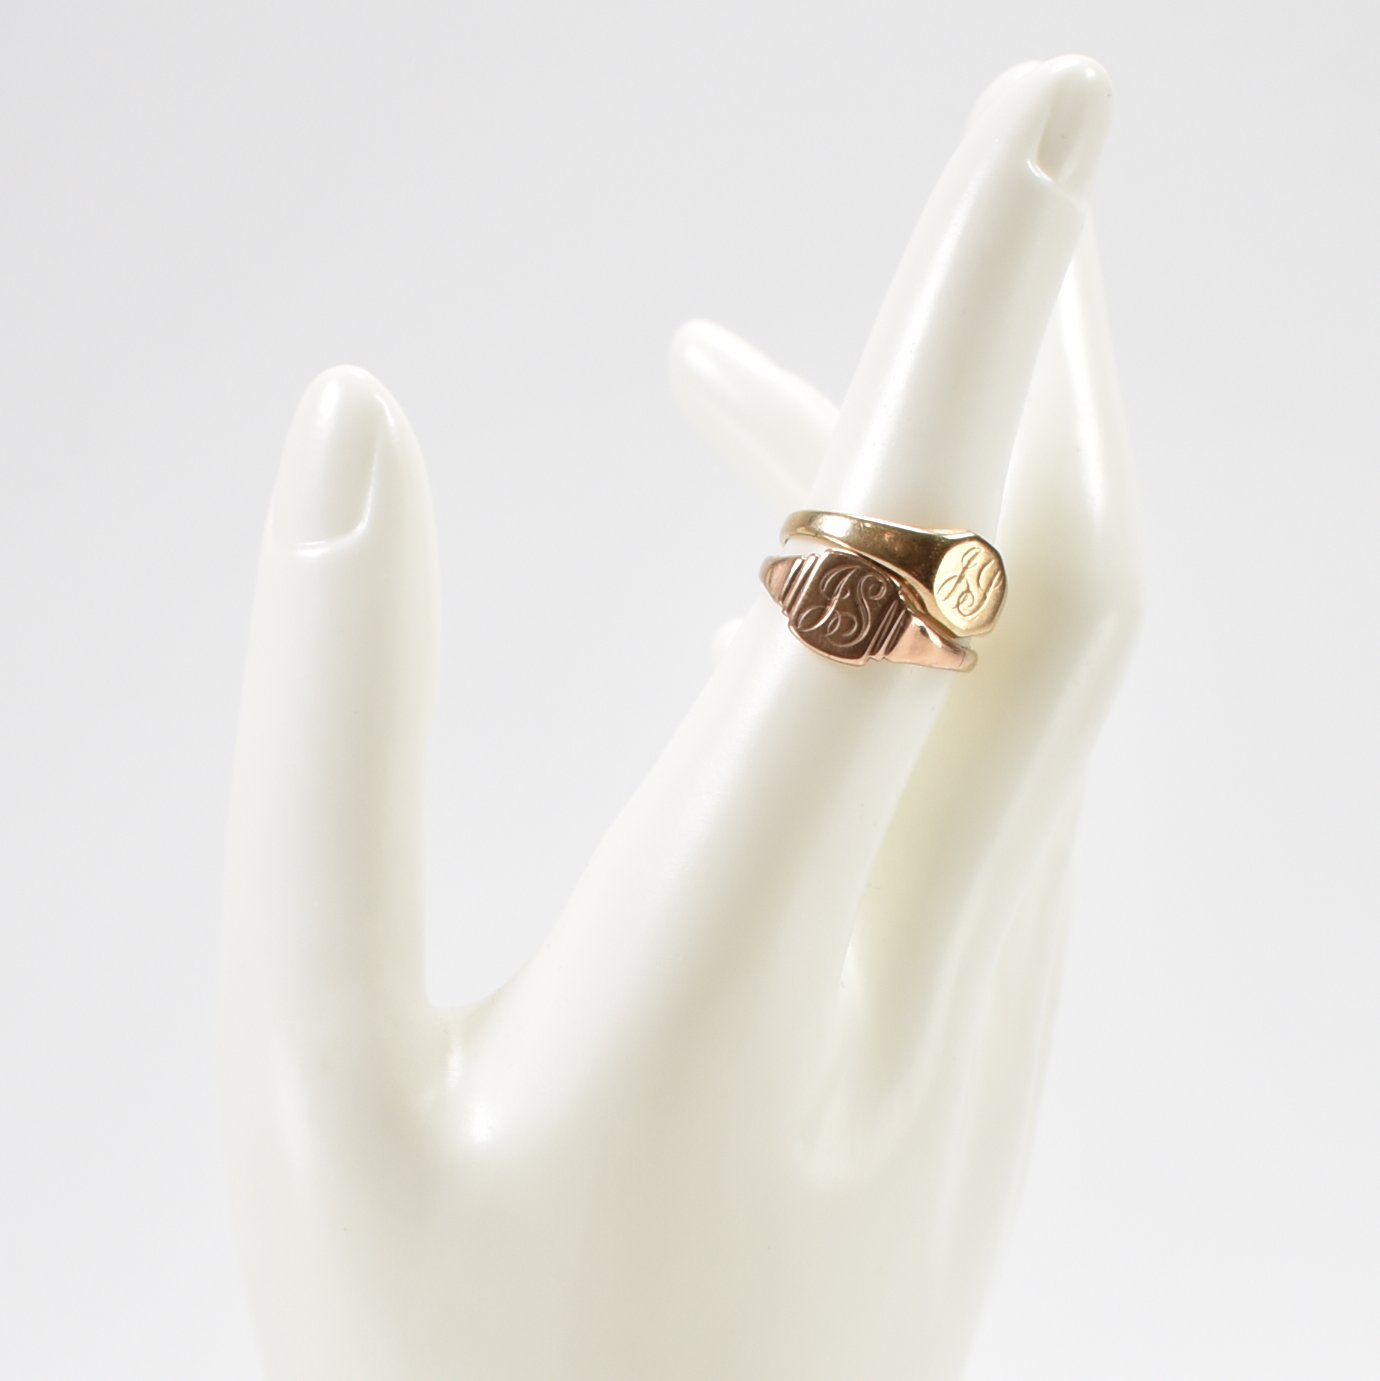 TWO 9CT GOLD SIGNET RINGS - Image 7 of 7